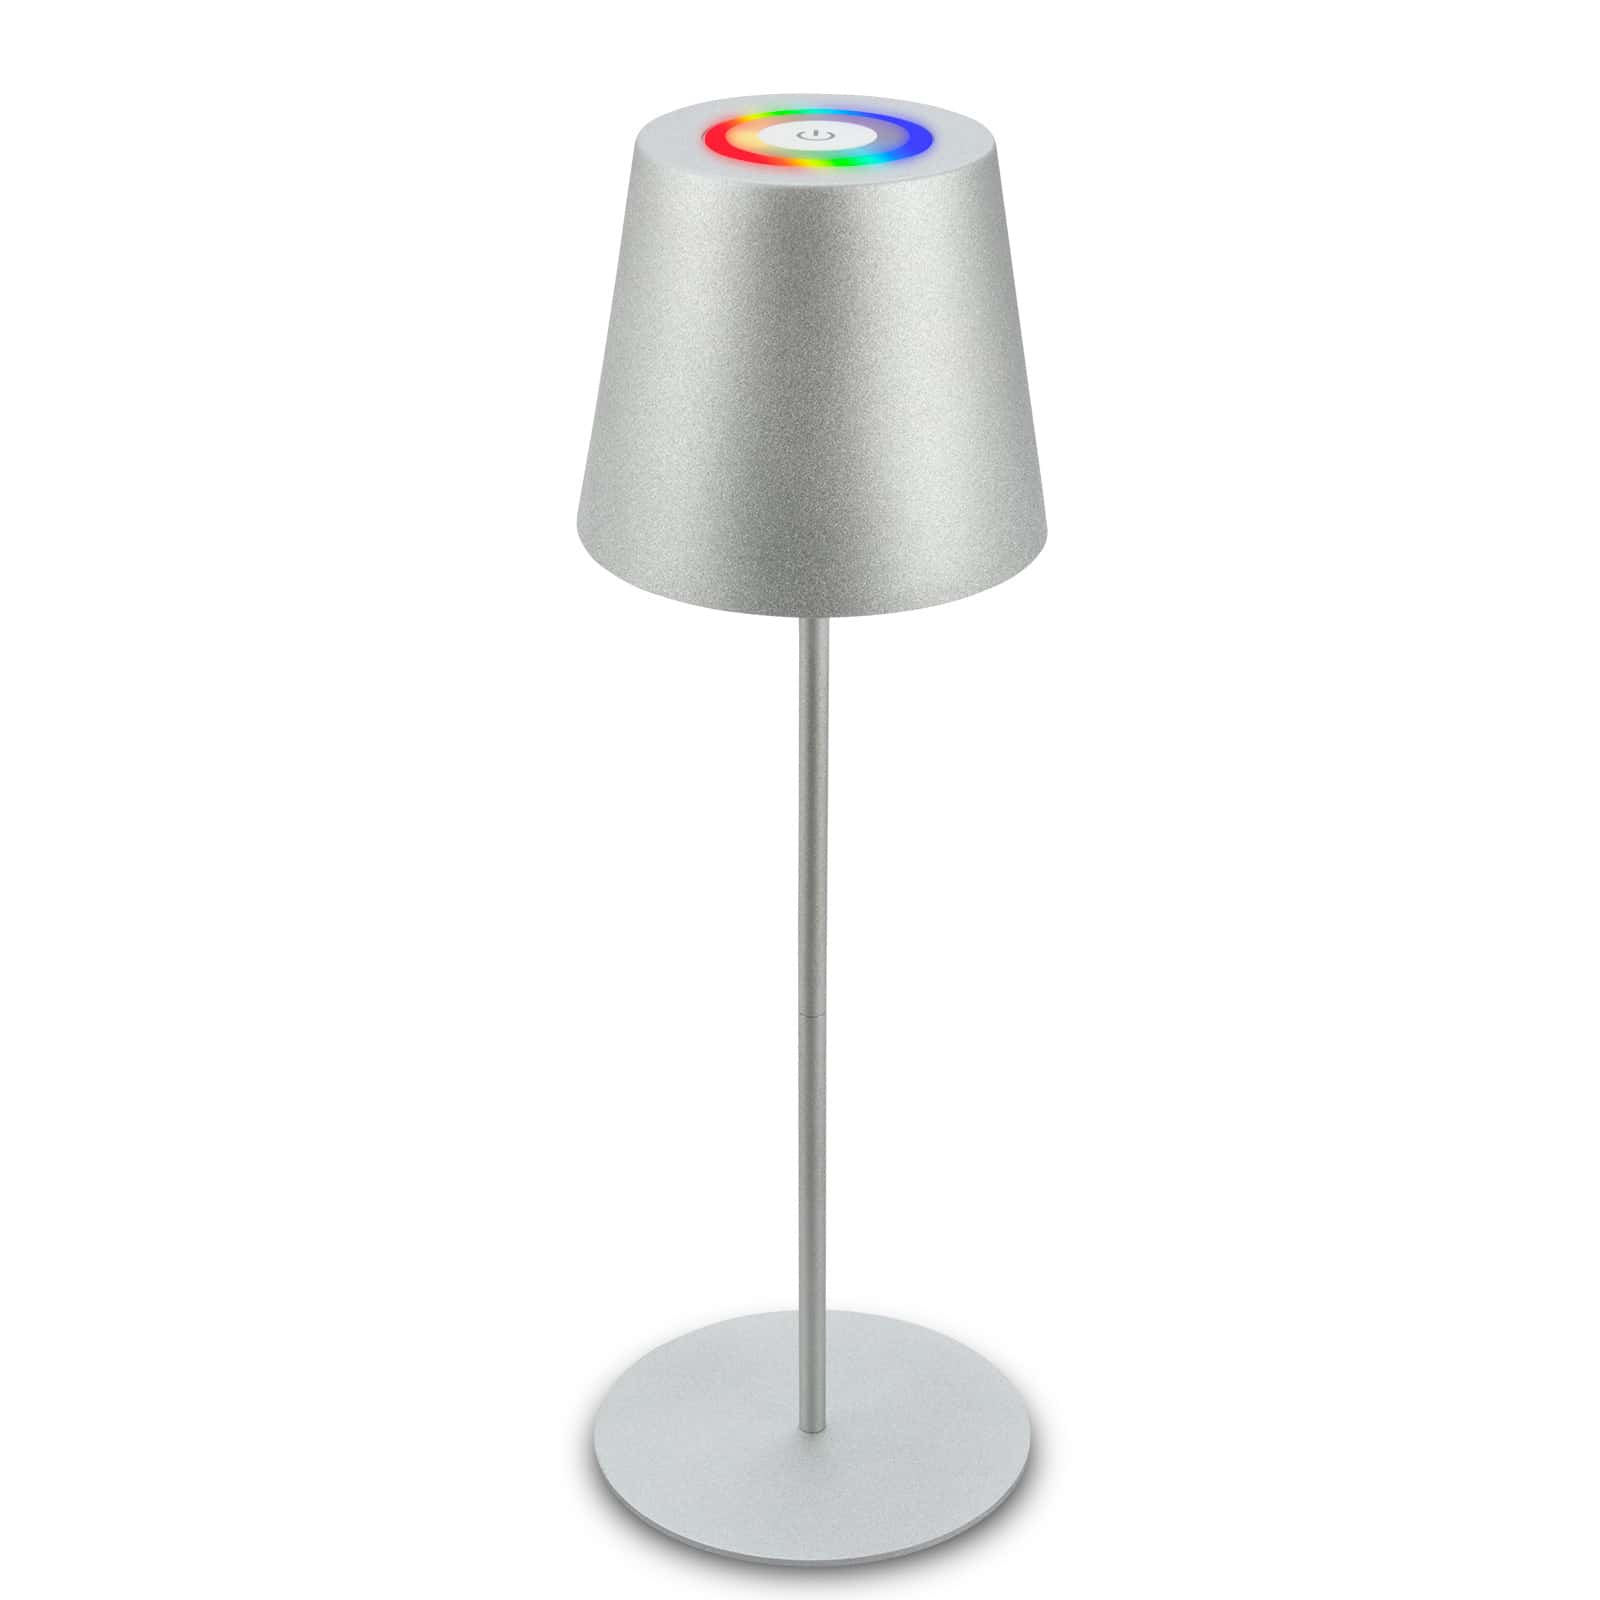 Briloner wireless table lamp, touch, colourful RGB+W light, height-adjustable